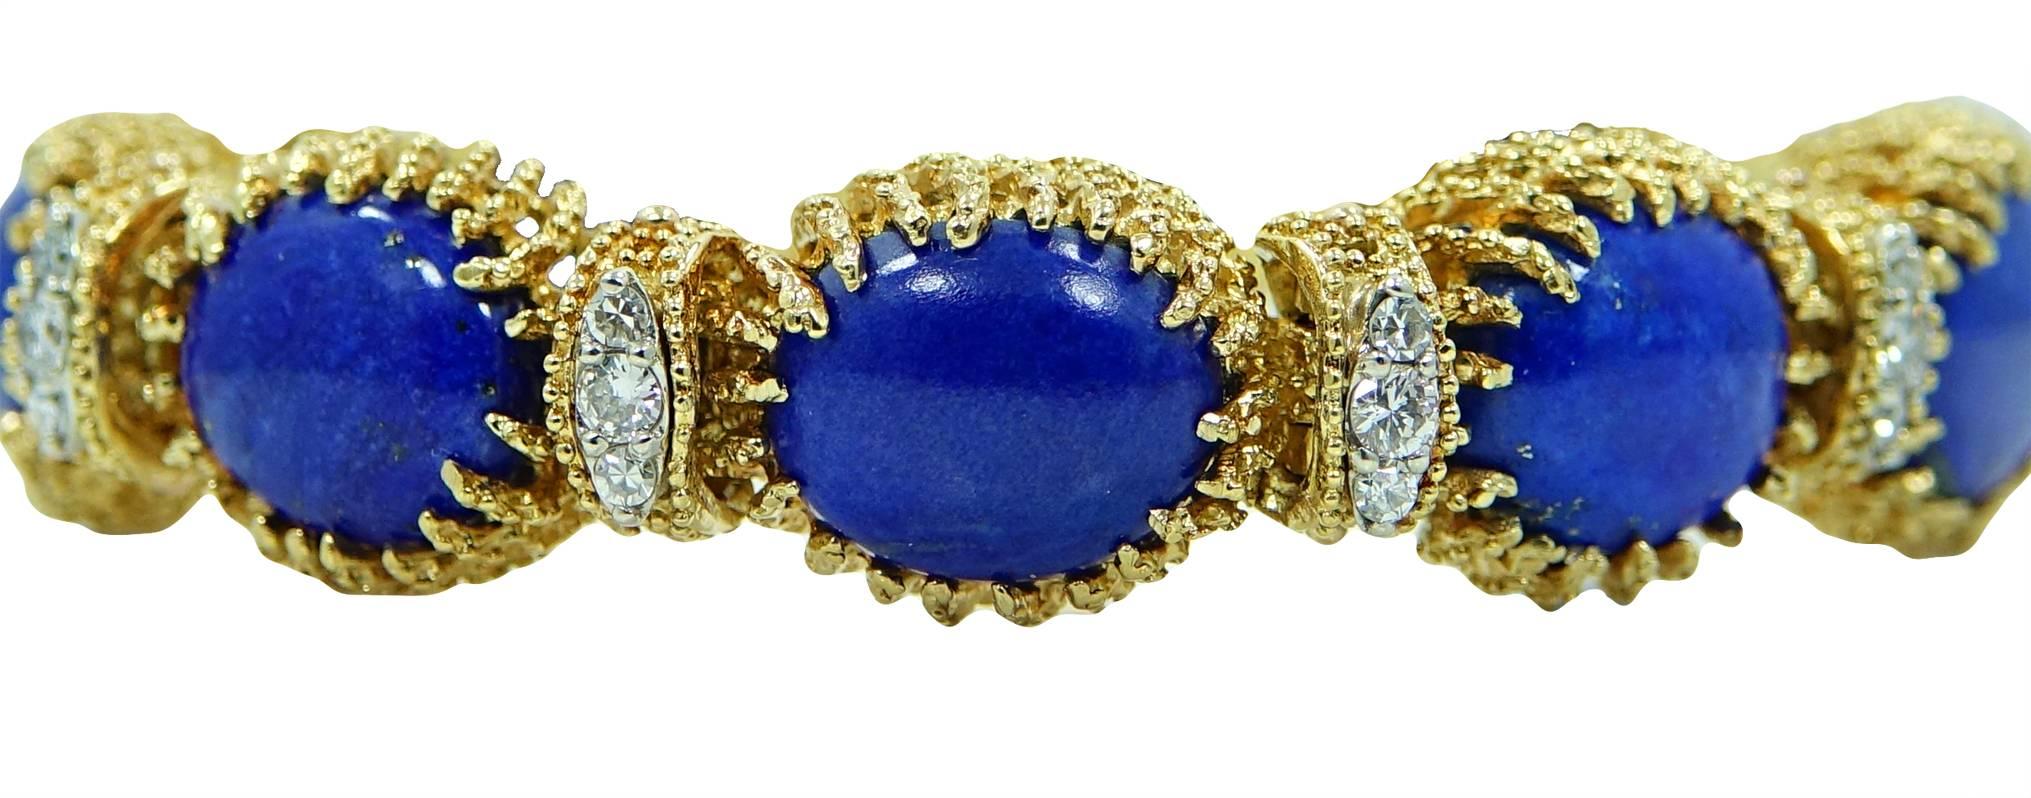 18K Yellow Gold La Triomphe Bracelet With 10 Oval Lapis Stones and 30 Round Brilliant Diamonds Weighing A Total Carat Weight Of 1.37ct. This Bracelet Is 6 Inches In Length.